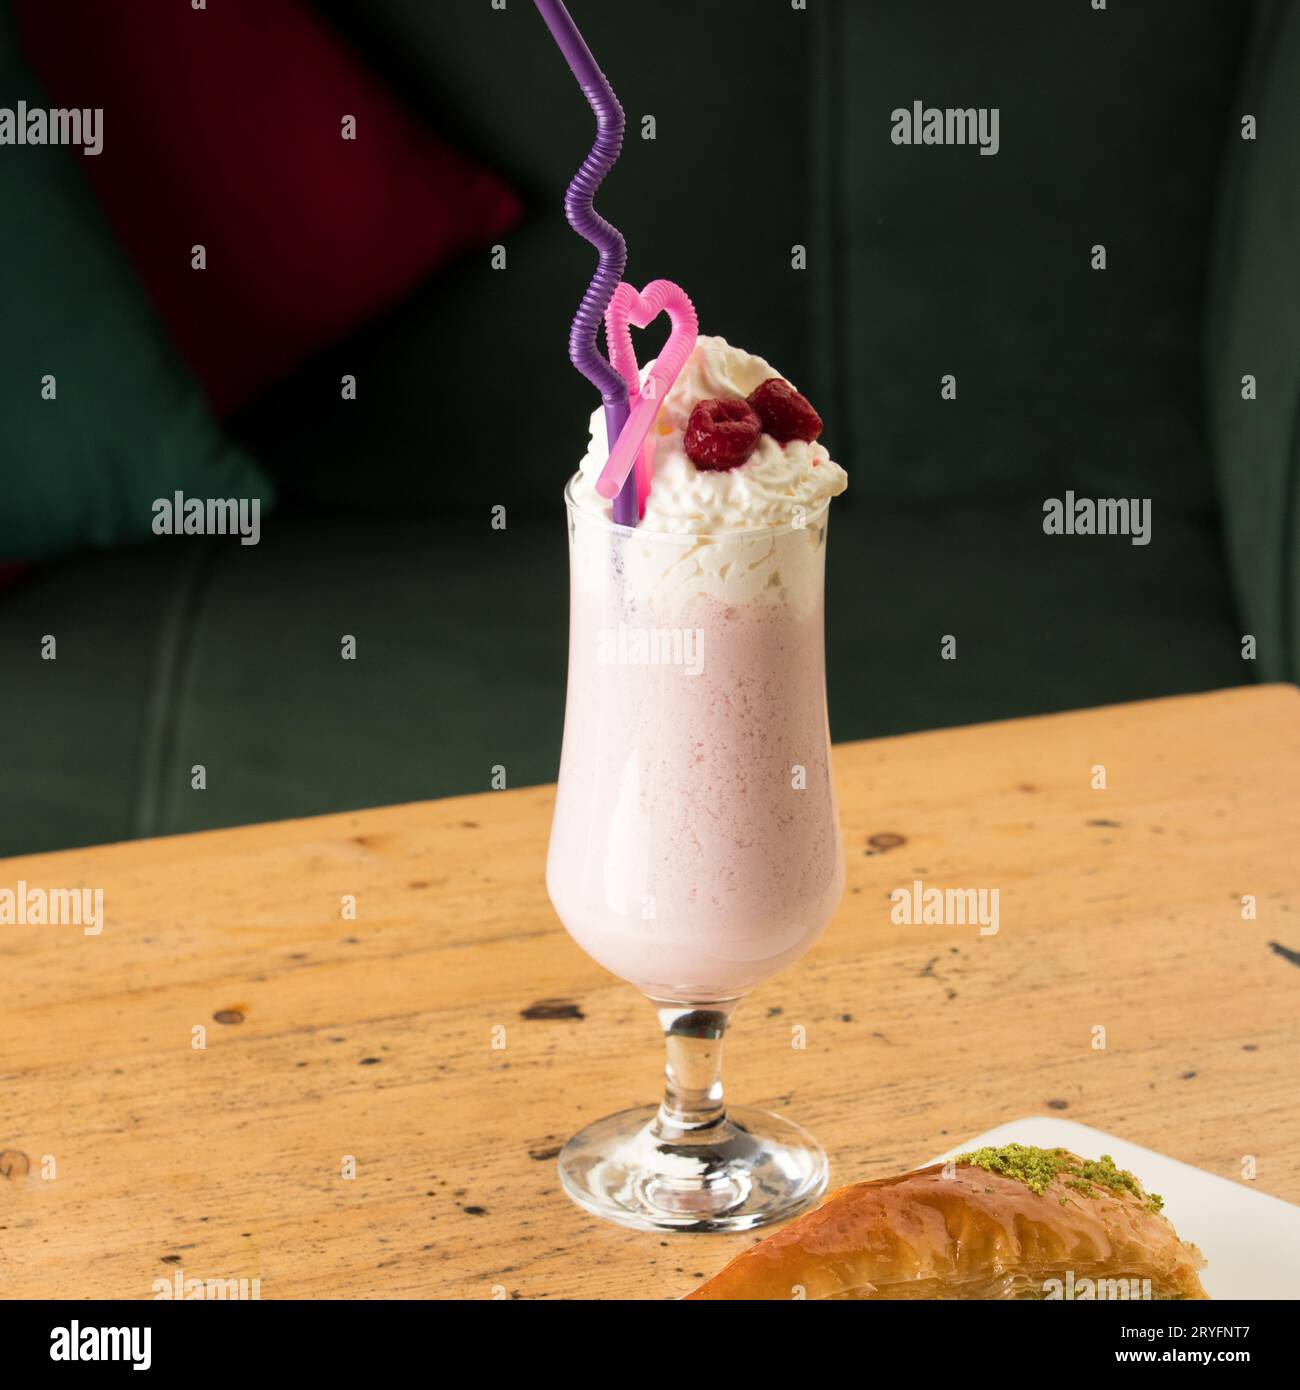 Healthy strawberry smoothie in a mug with drinking tubules next to baklava on a wooden table Stock Photo